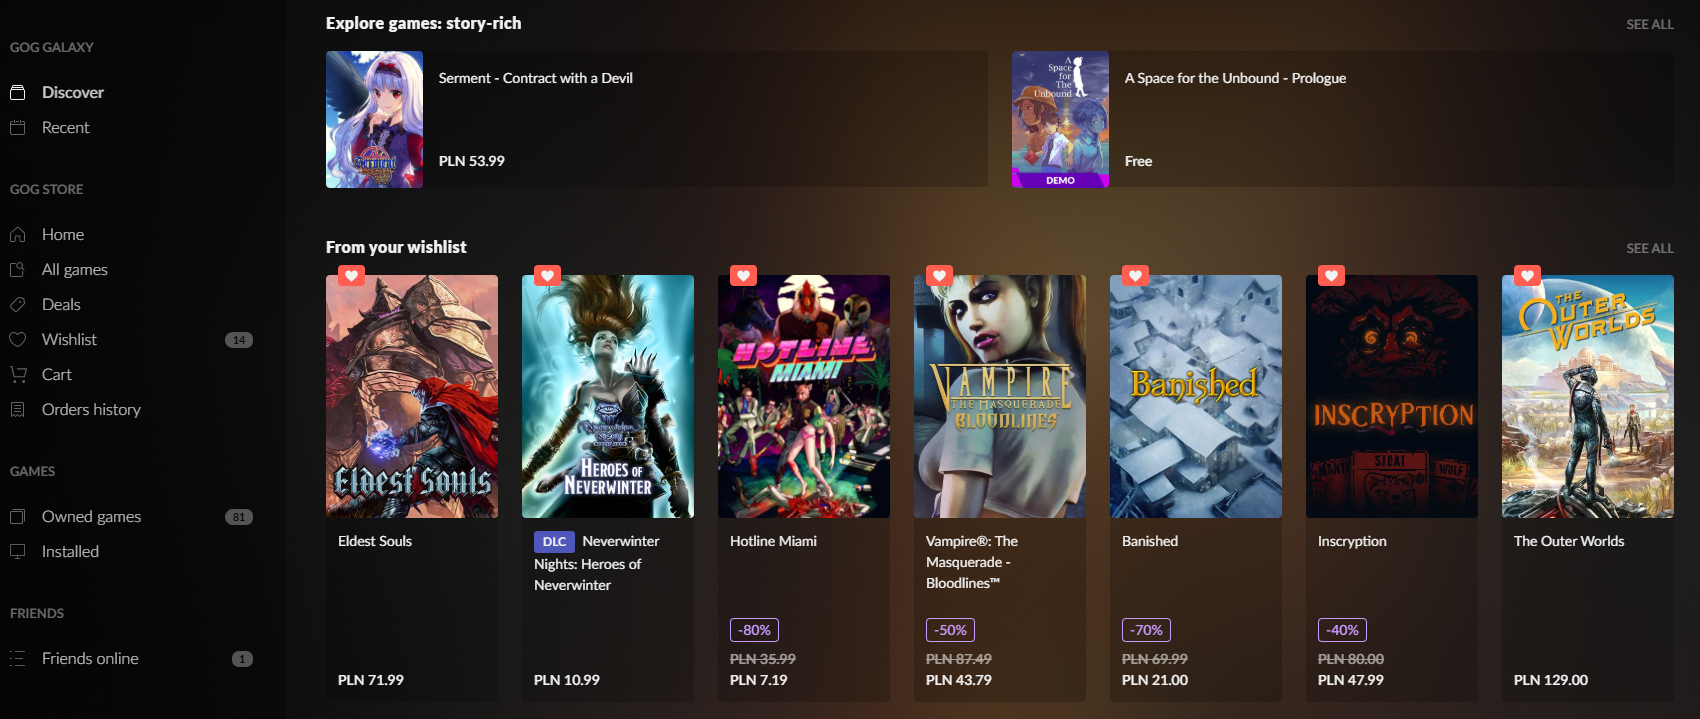 GOG Galaxy 2.0 update now lets you hide games - MSPoweruser